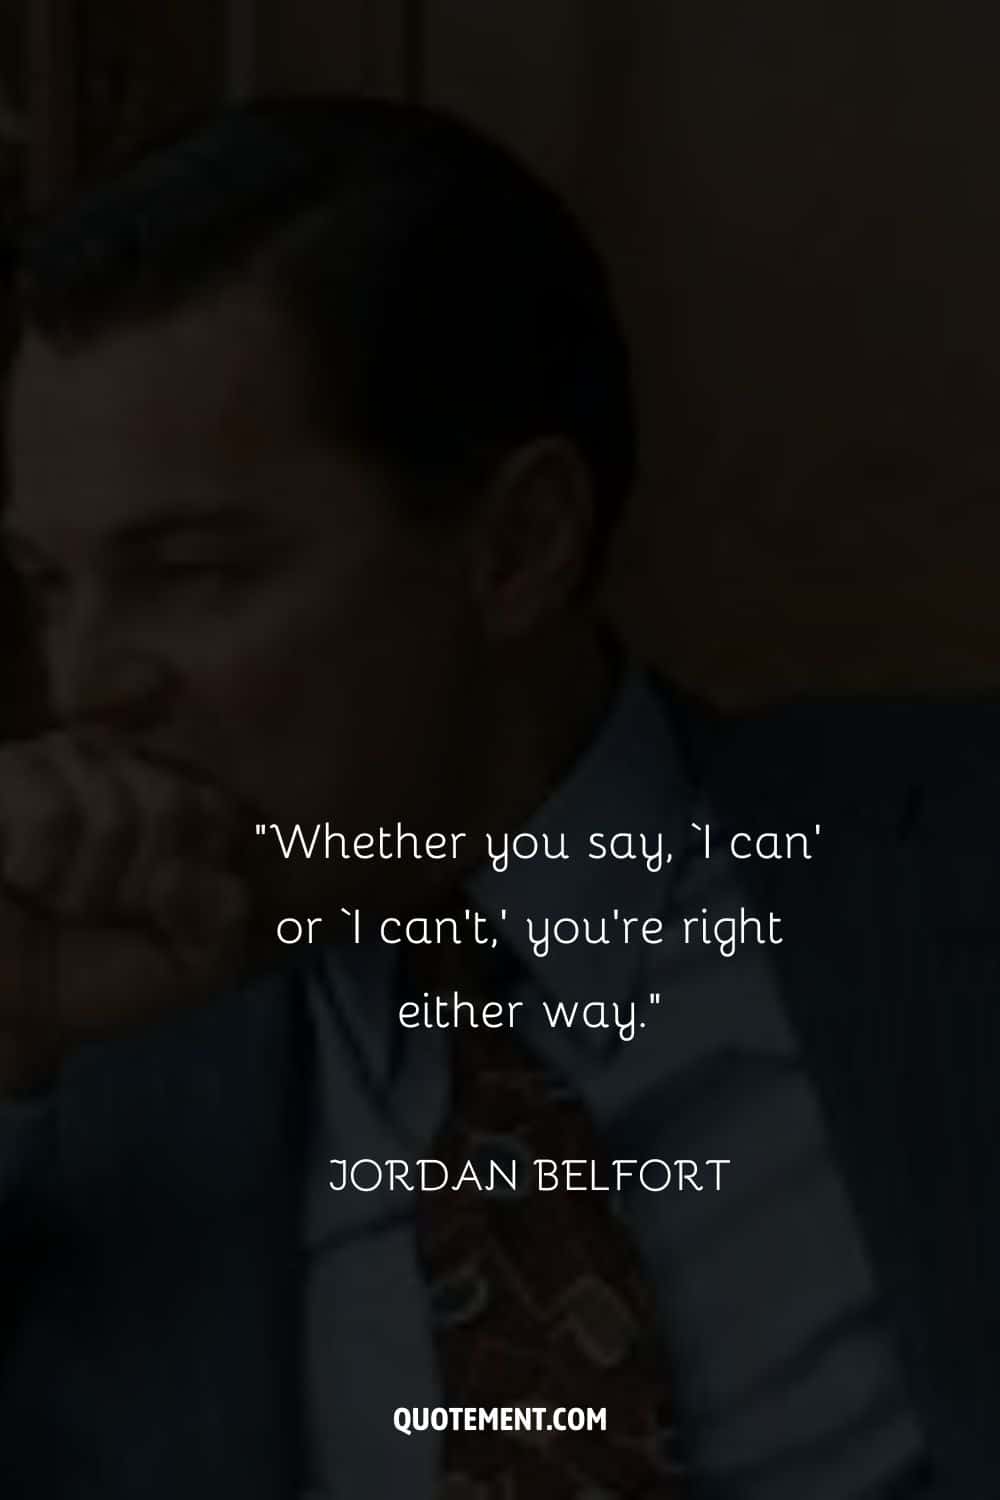 Leonardo DiCaprio's intense portrayal representing quote from wolf of wall street
